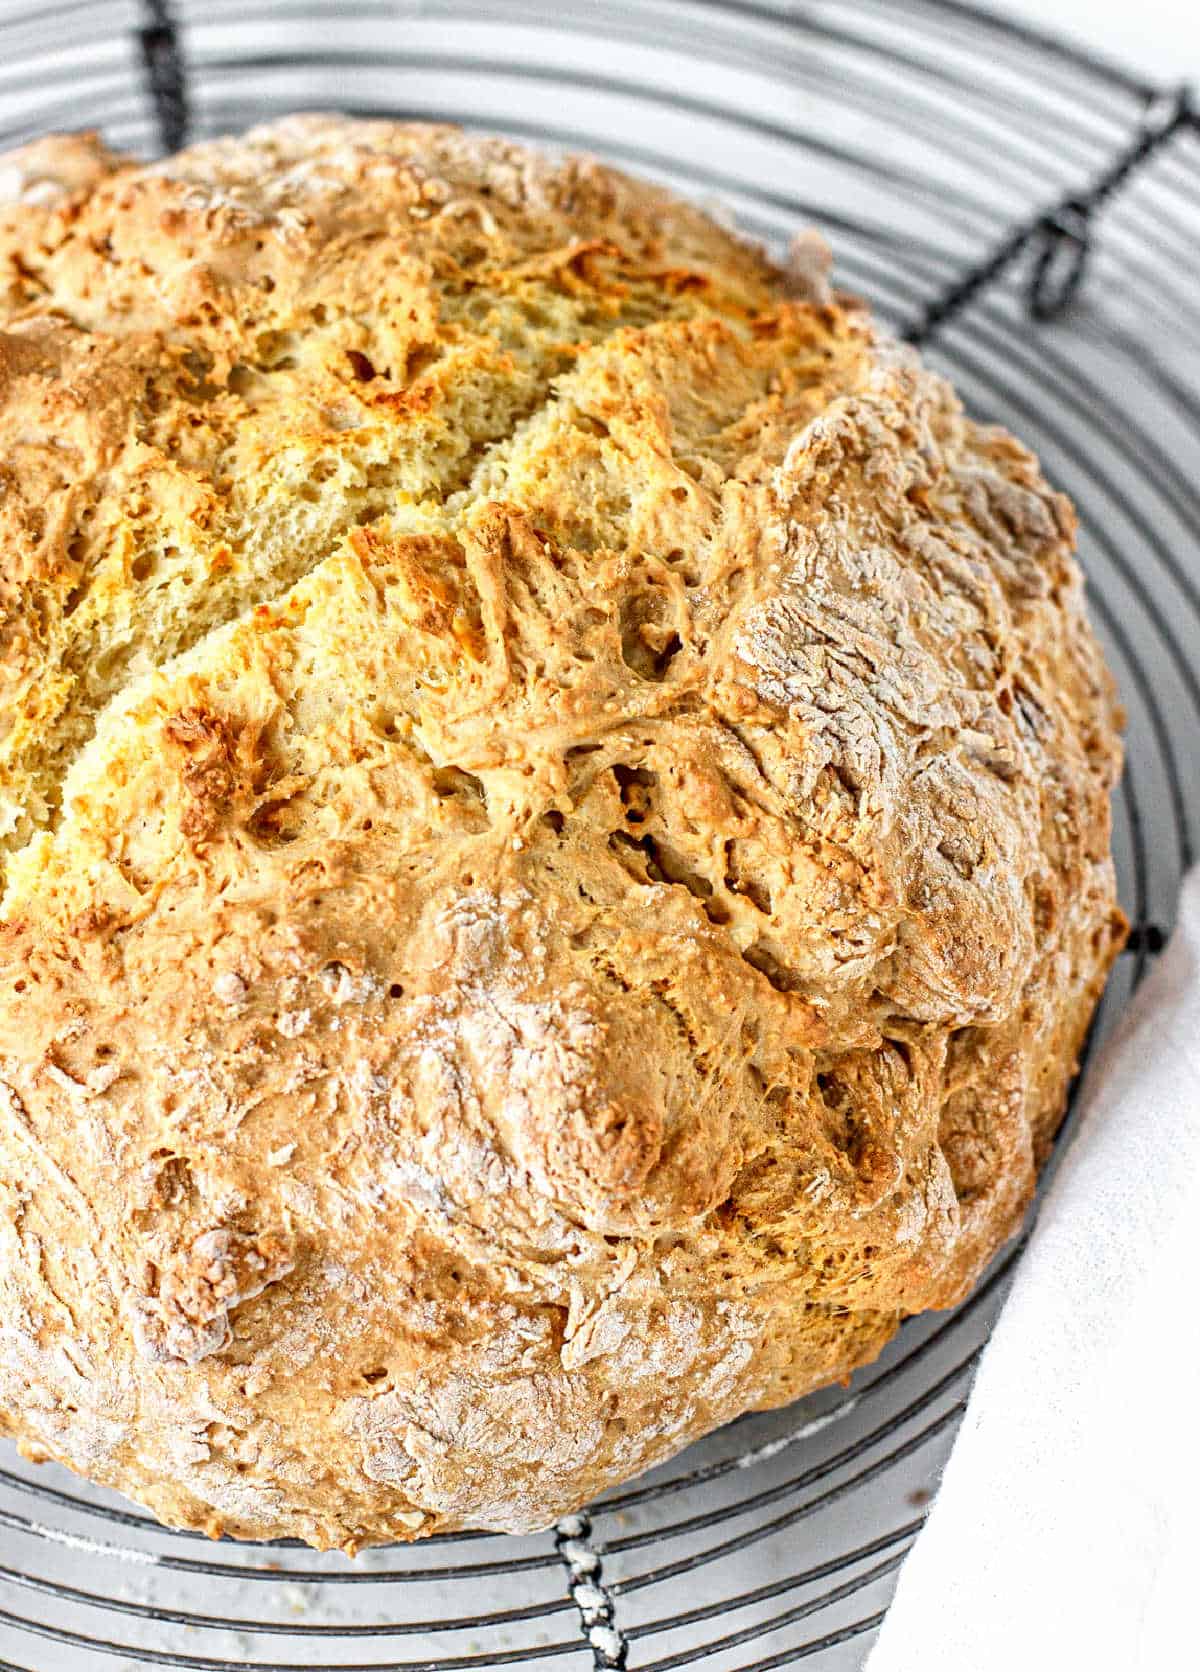 Top view of whole soda bread on round wire rack